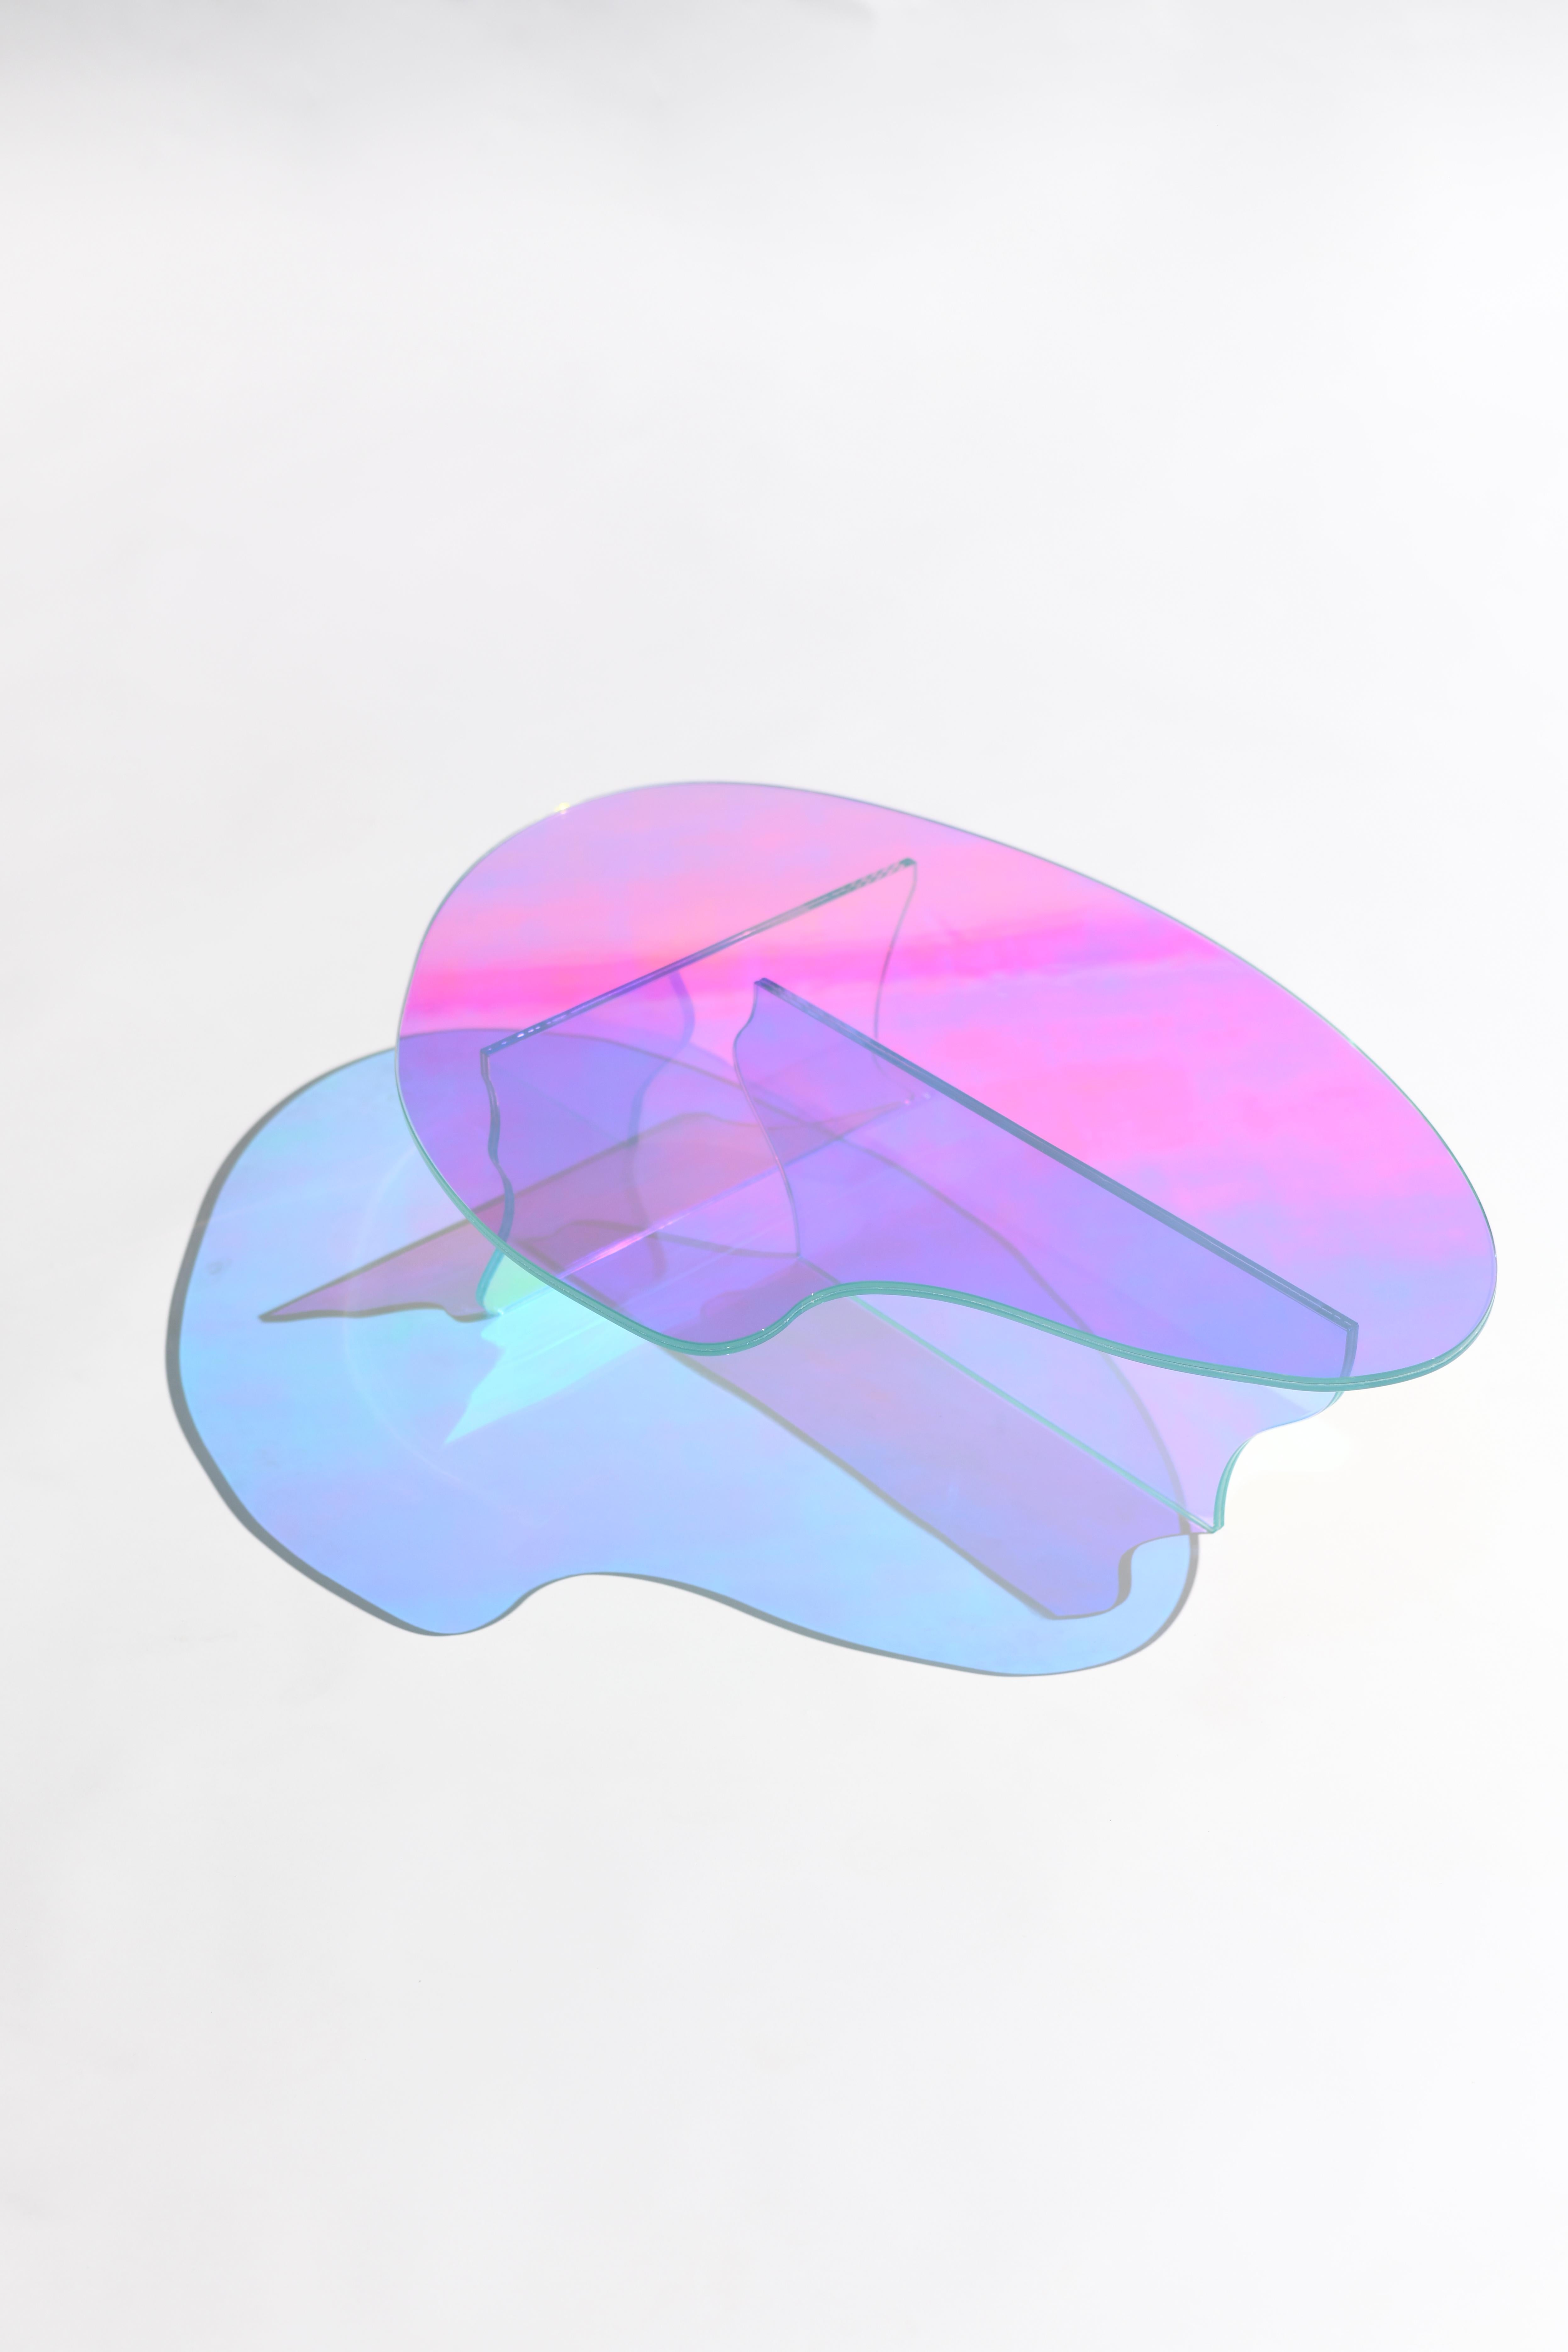 Kinetic colors glass table by Brajak Vitberg
Materials: Glass, dichroic film
Dimensions: 77 x 43 x 40 cm

Bijelic and Brajak are two architects from Ljubljana, Slovenia.
They are striving to design craft elements and make them timeless through